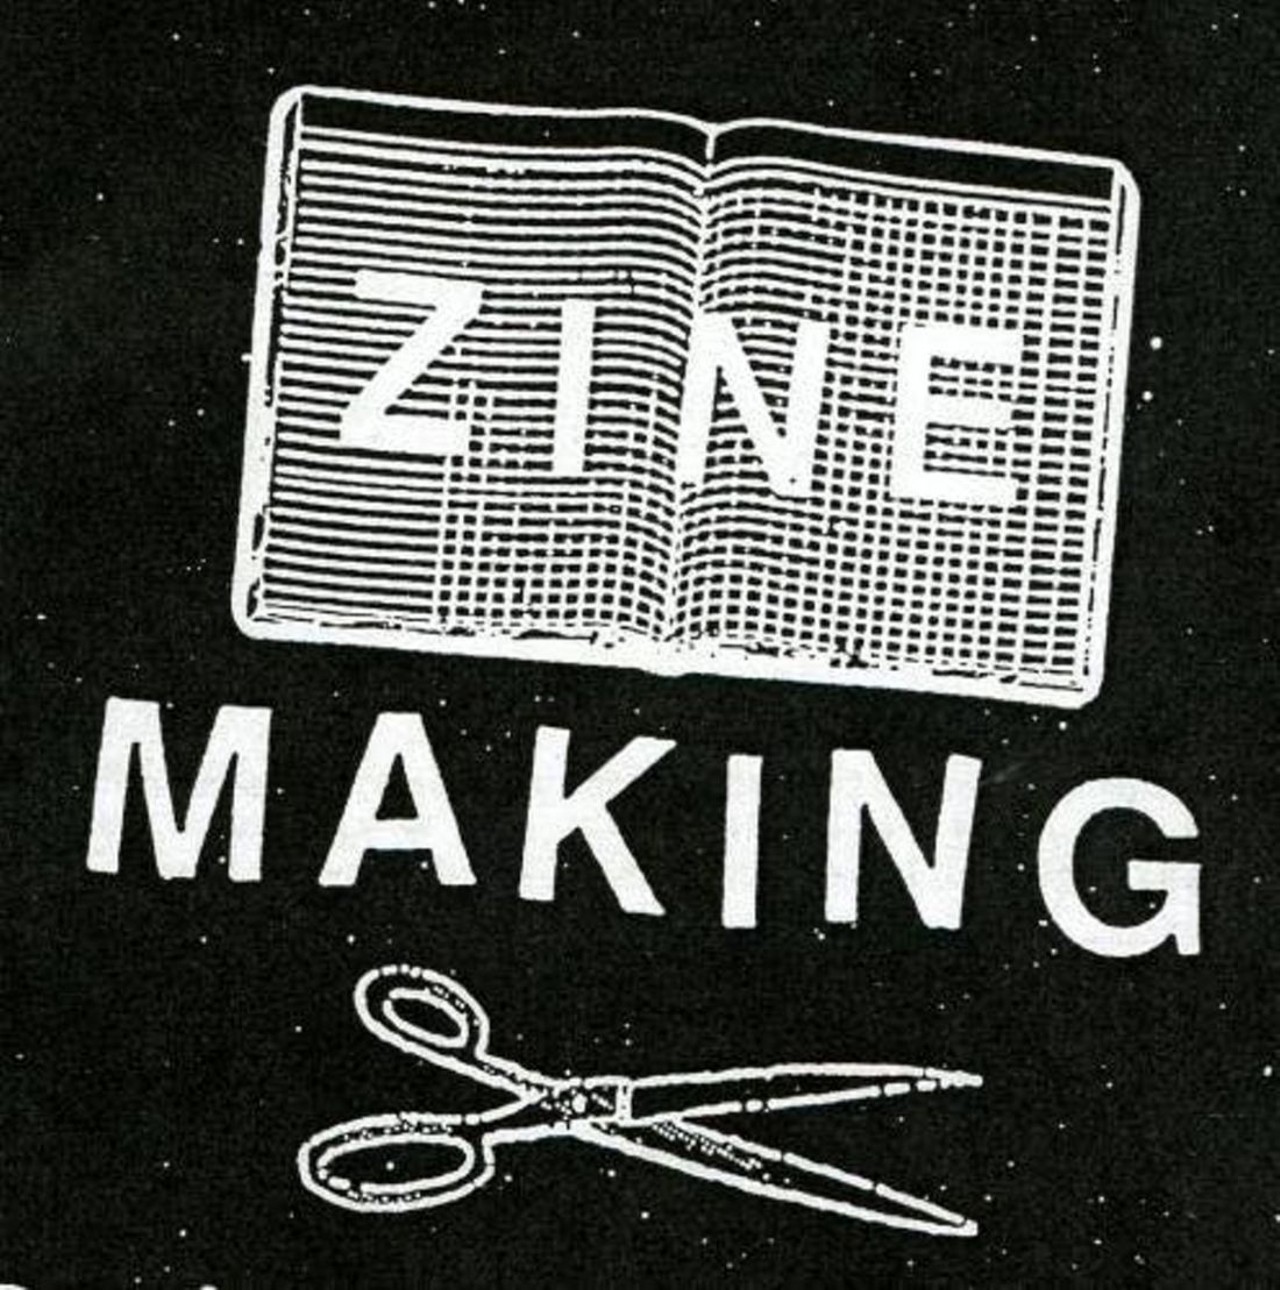  A Zine Workshop
Wed, Aug. 23
Provided Photo